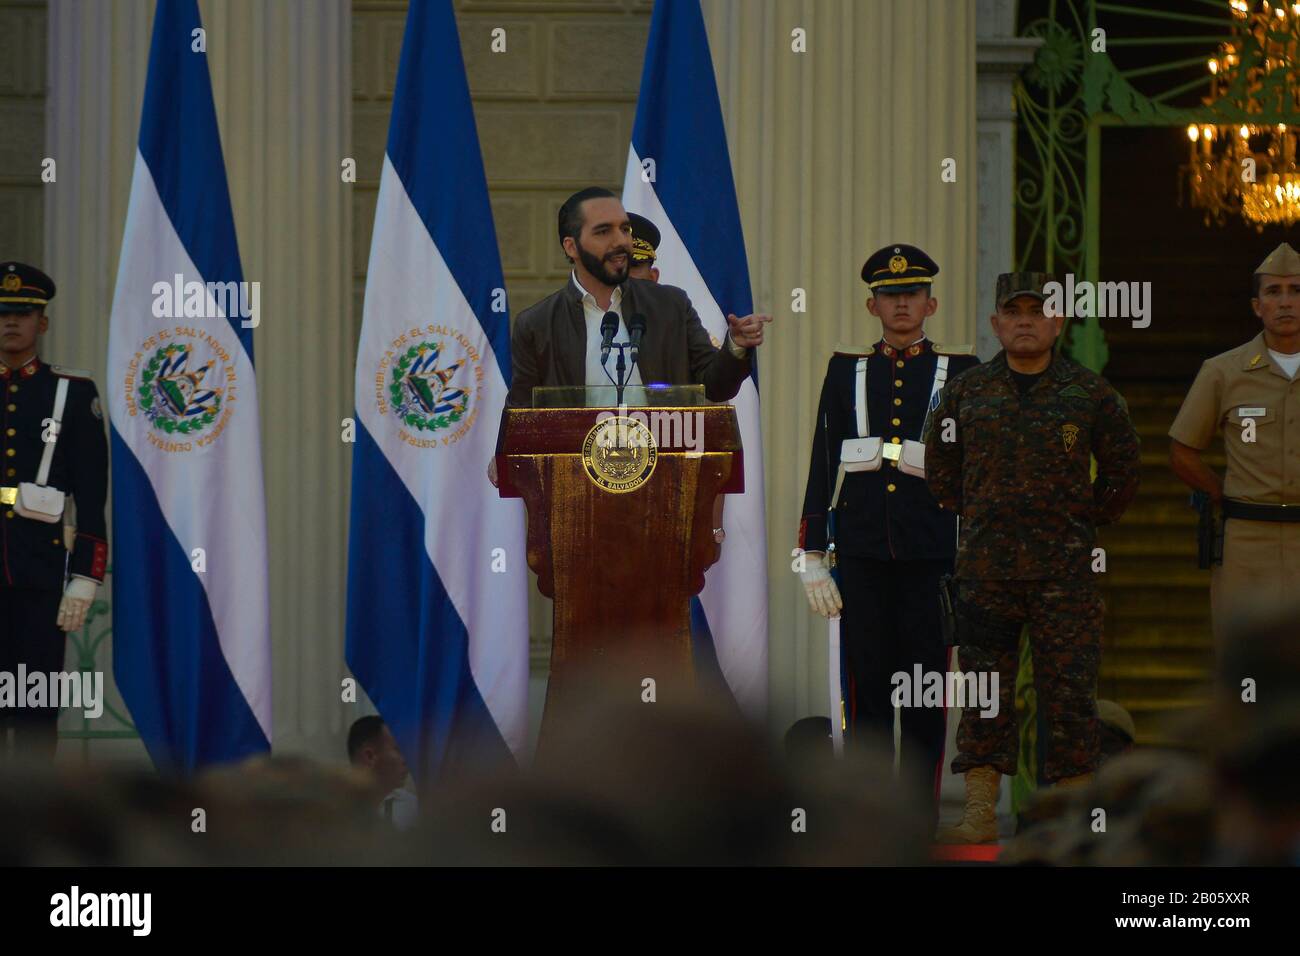 San Salvador, El Salvador. 18th Feb, 2020. President NAYIB BUKELE gestures while speaking to troops from the Salvadoran army.1400 troops where incorporated by President of El Salvador Nayib Bukele to El SalvadorÂ´s security plan ''Territorial Control''. This incorporation happens just nine days after Bukele busted into congress with the help of military to pressure lawmakers to approve a loan. Credit: Camilo Freedman/ZUMA Wire/Alamy Live News Stock Photo